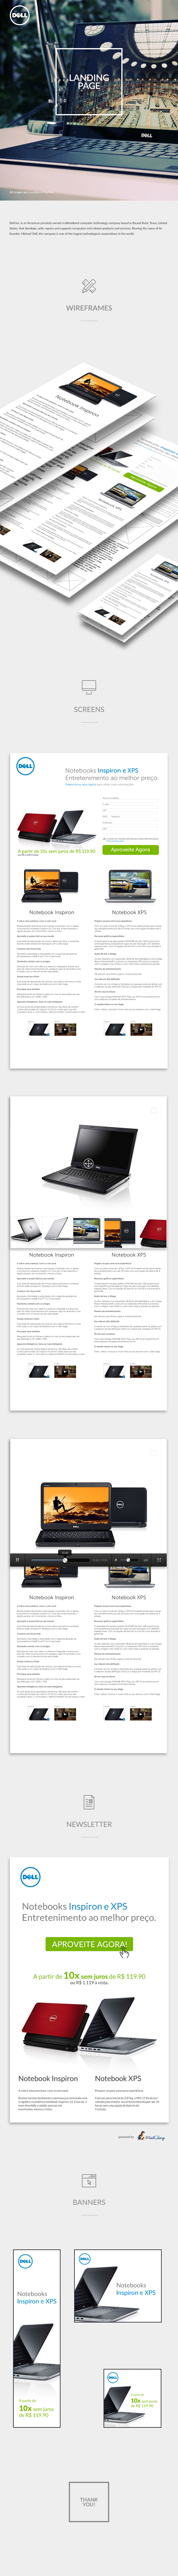 dell inspirion xps landing page